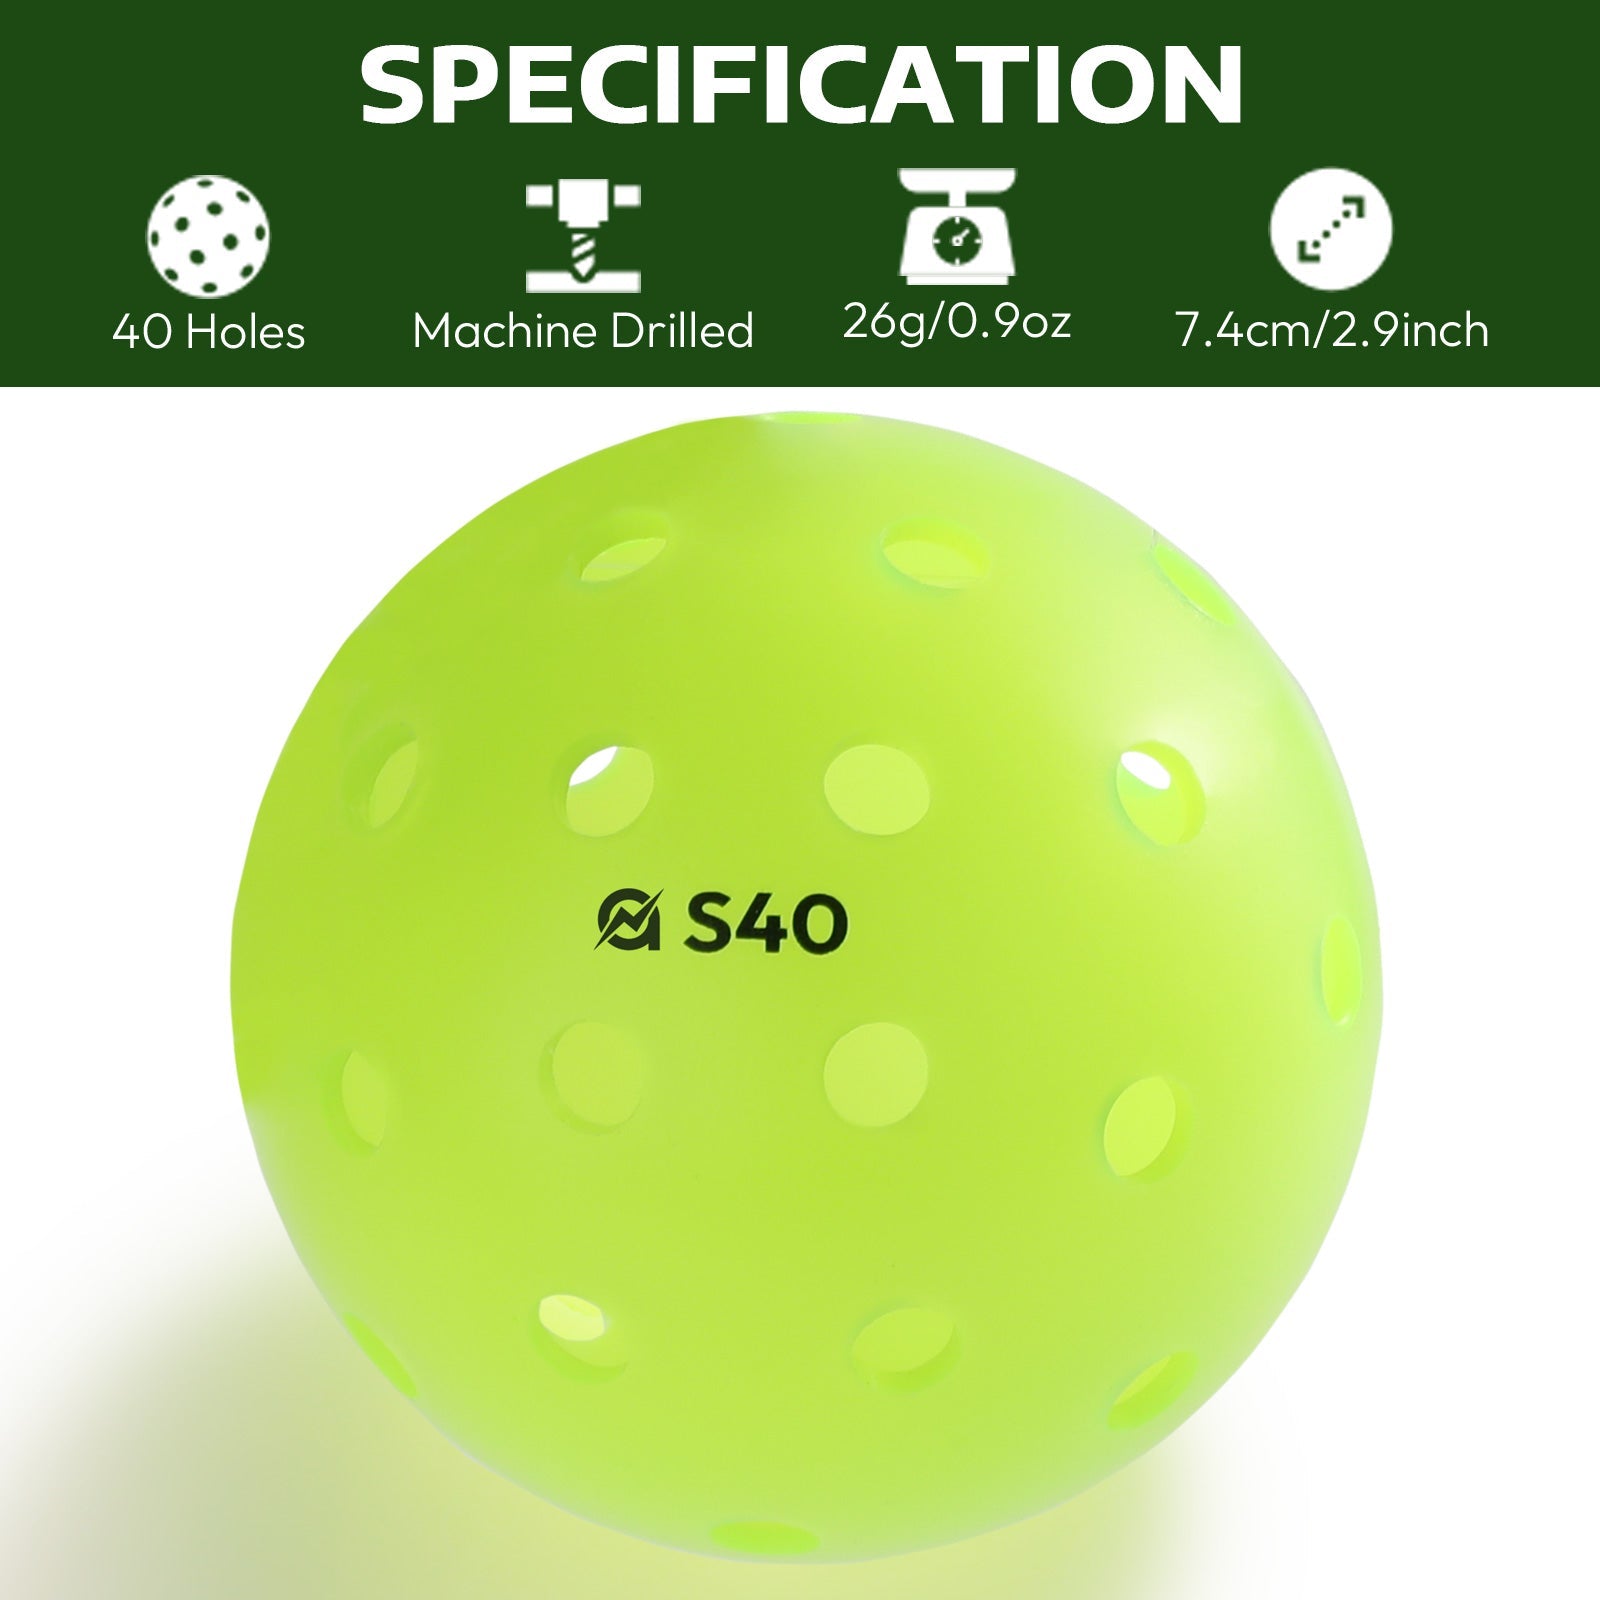 A11N SPORTS Sporting Goods > Outdoor Recreation > Outdoor Games > Pickleball 22ft Portable Pickleball Net Bundle